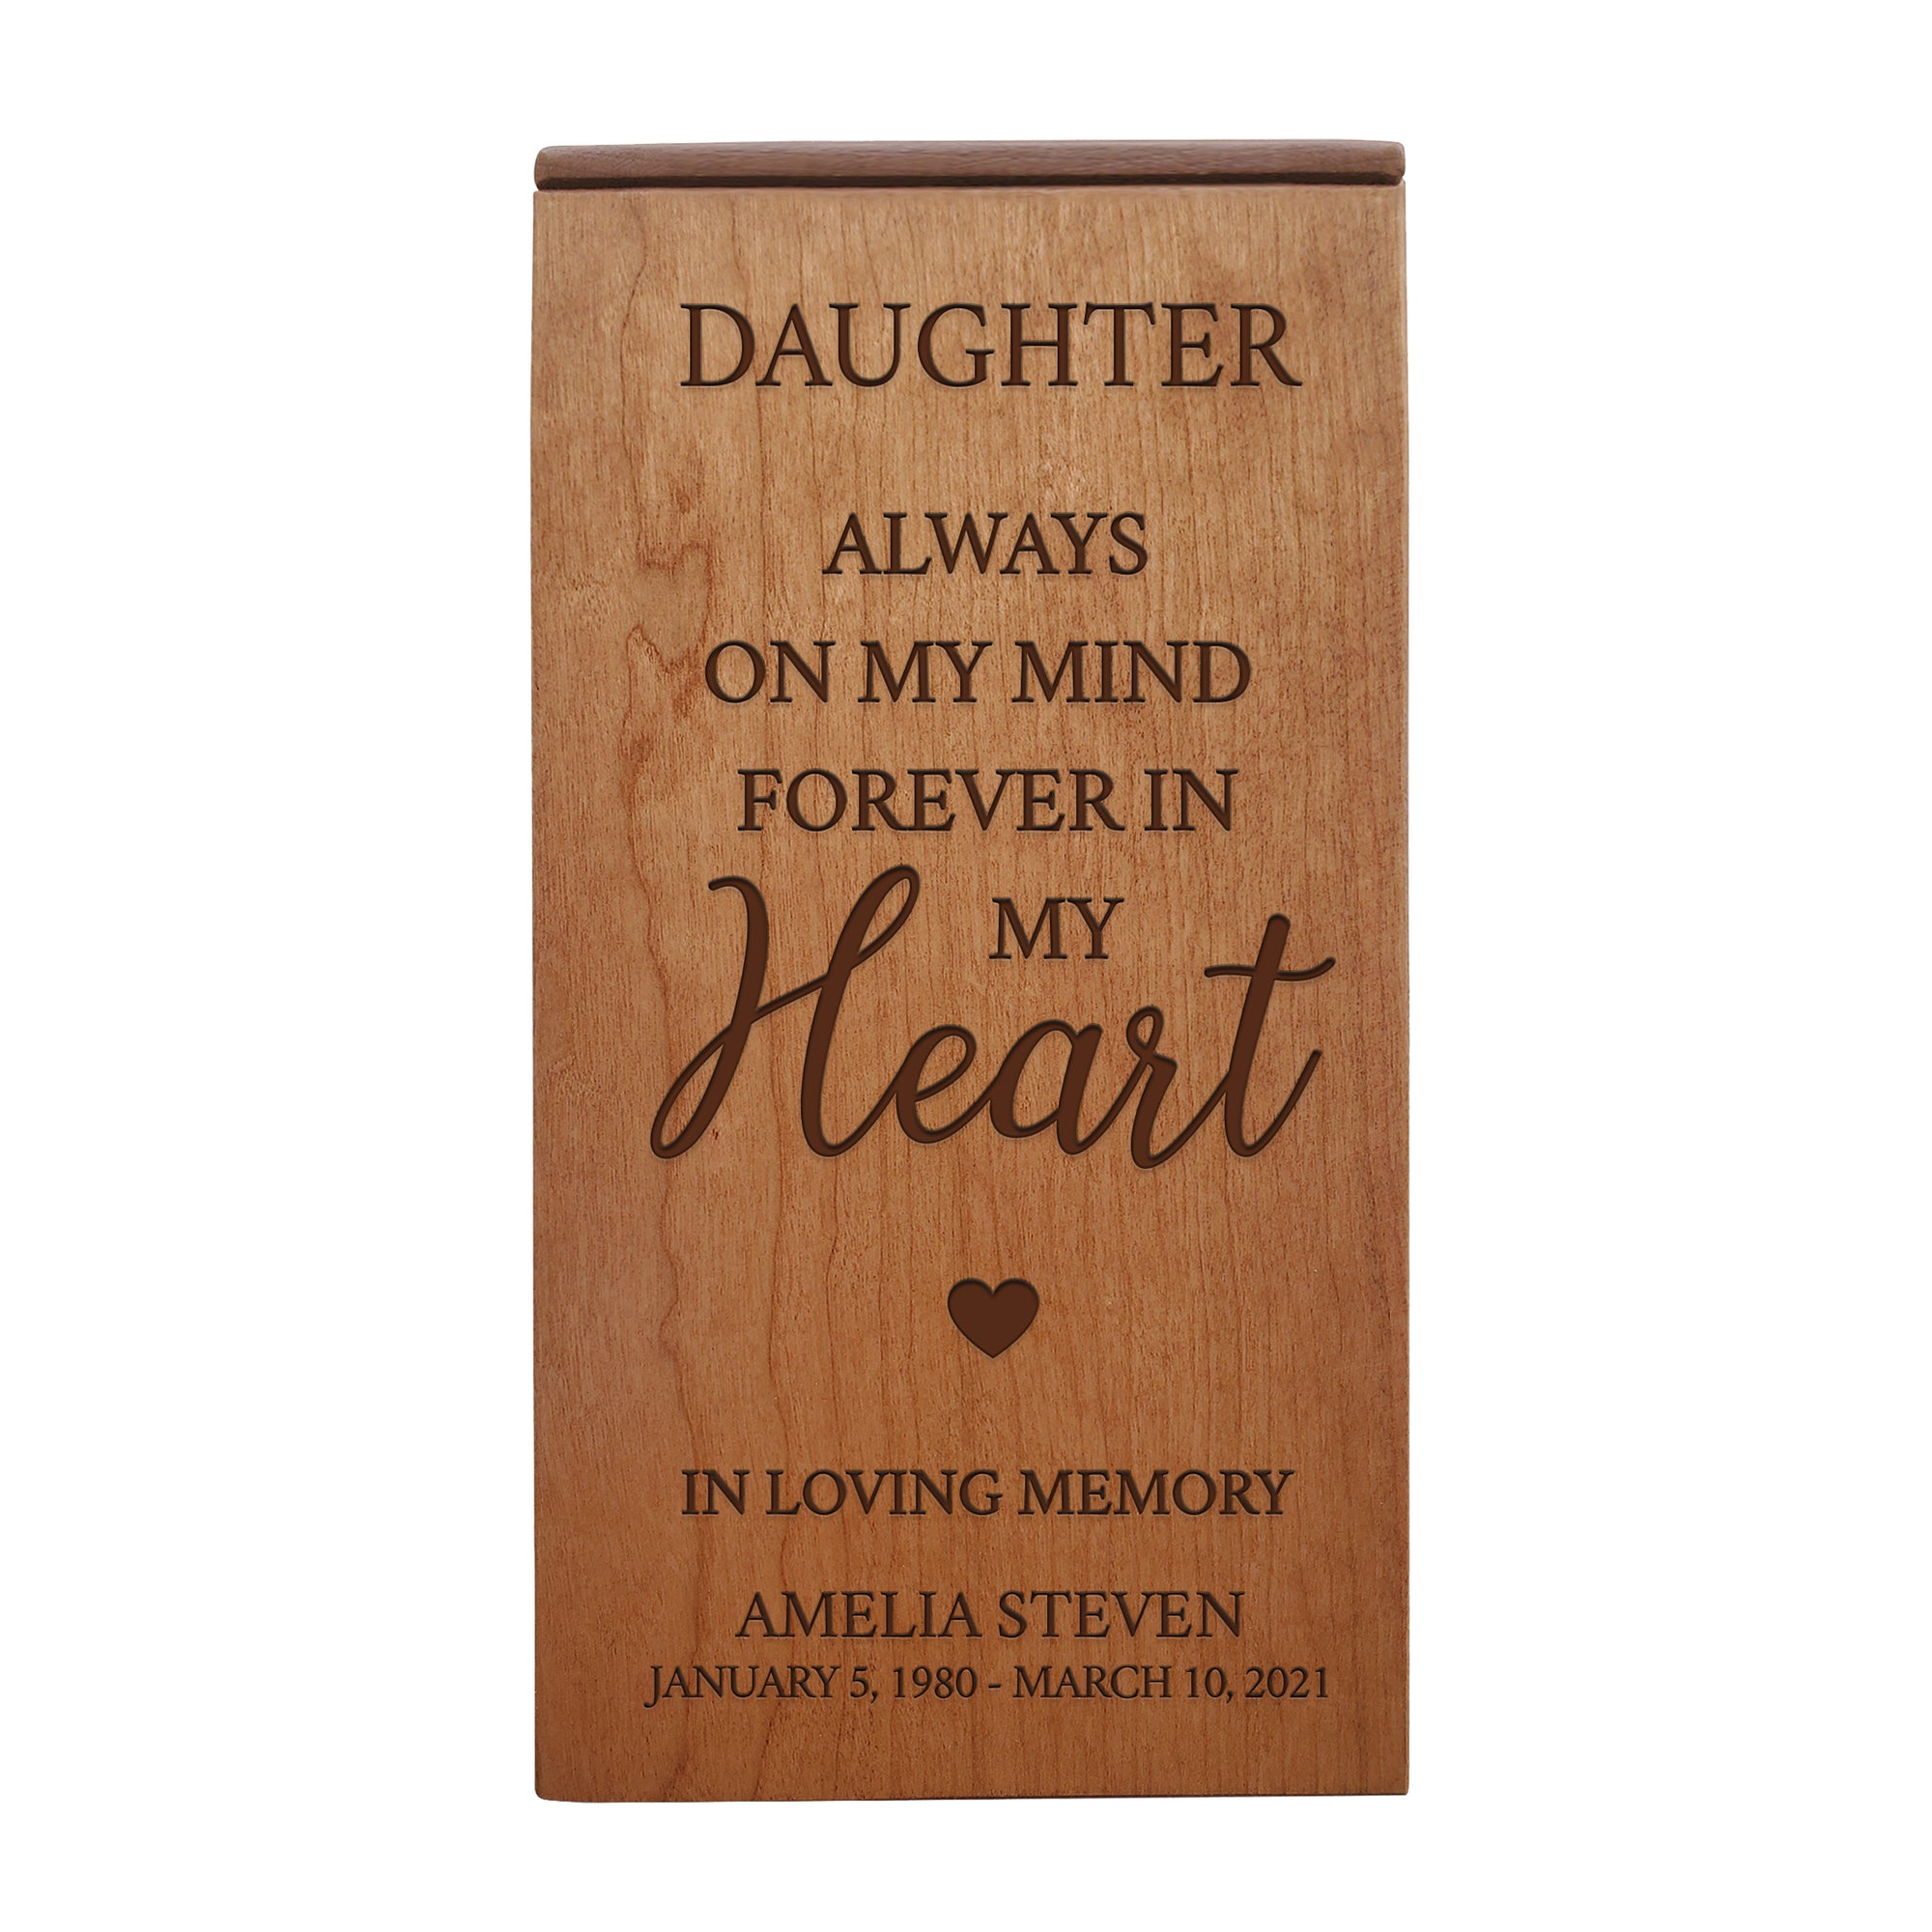 Custom Engraved Memorial Cremation Keepsake Urn Box 4.5x4.5 holds 100 cu in of Ashes in - Daughter, Always On My Mind. Sympathy Gift for the Loss of a Loved One Bereavement Gift for Family Friends Condolence Sympathy Comfort Keepsake Funeral Decoration. Cremation Urns, urn for ashes, urns for humans, urns for dad, urns for mom, urns for sale, urns for human ashes, pet urns, cherished urns, small urns, small urns for ashes, Wooden Urns, Wooden Keepsake Urn, Wood Cremation Urns.